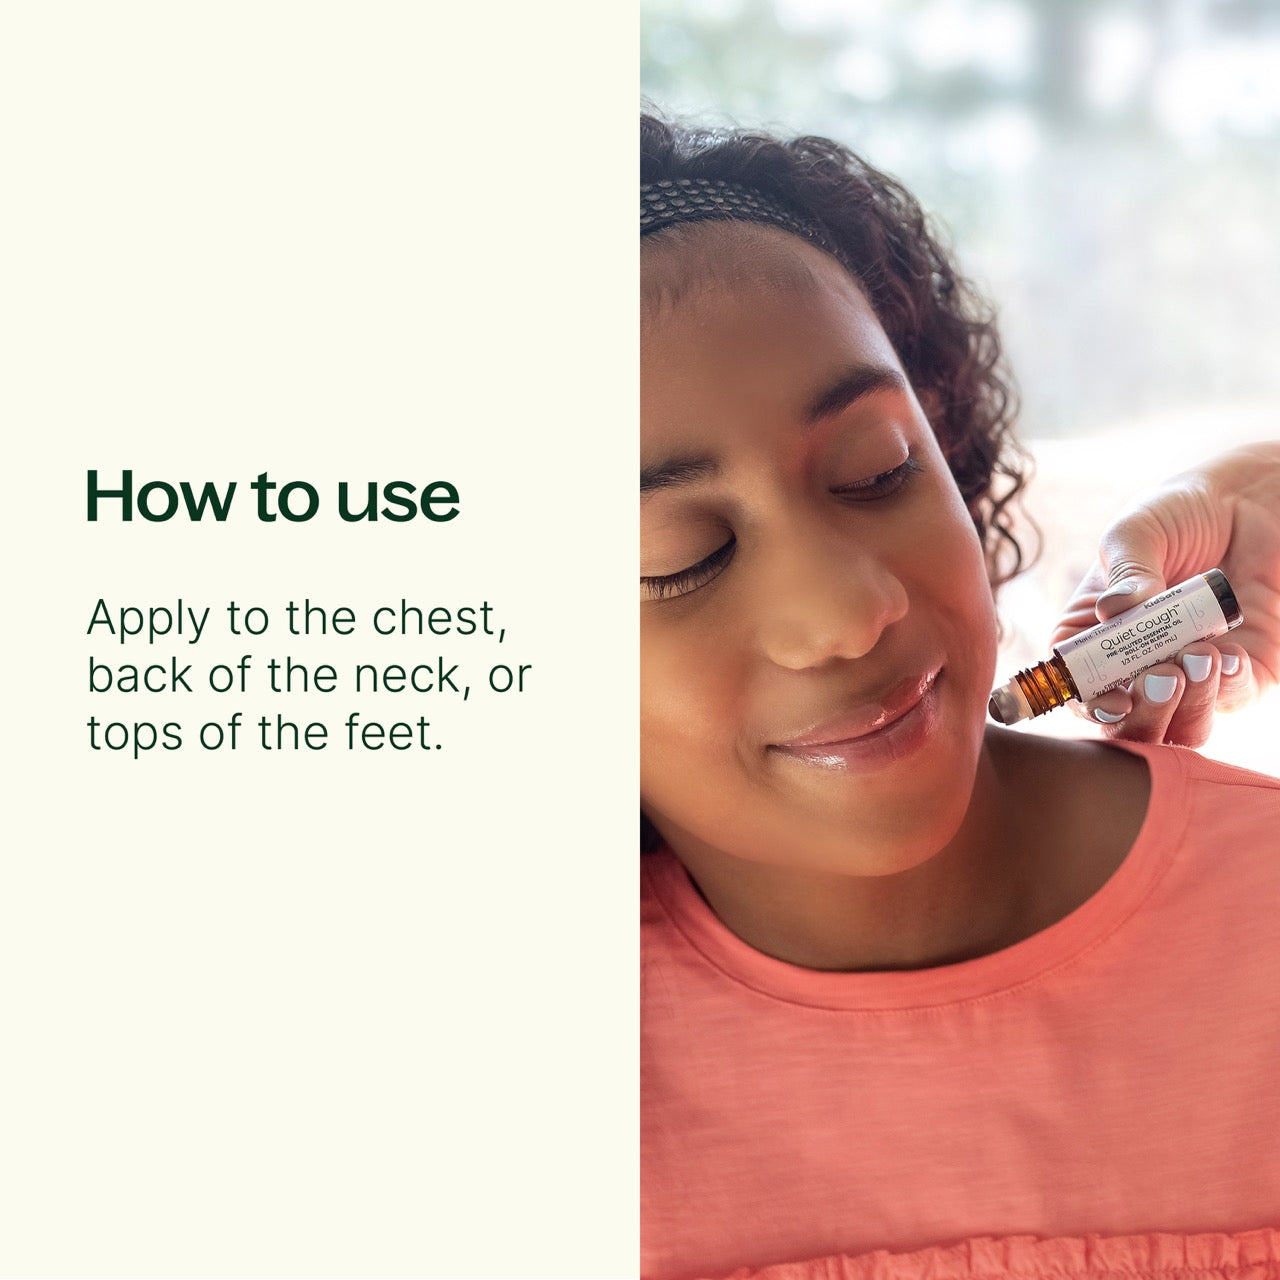 Quiet Cough™ KidSafe Essential Oil Blend Pre-Diluted Roll-On How to Use: Apply to the chest, back of the neck, or tops of the feet